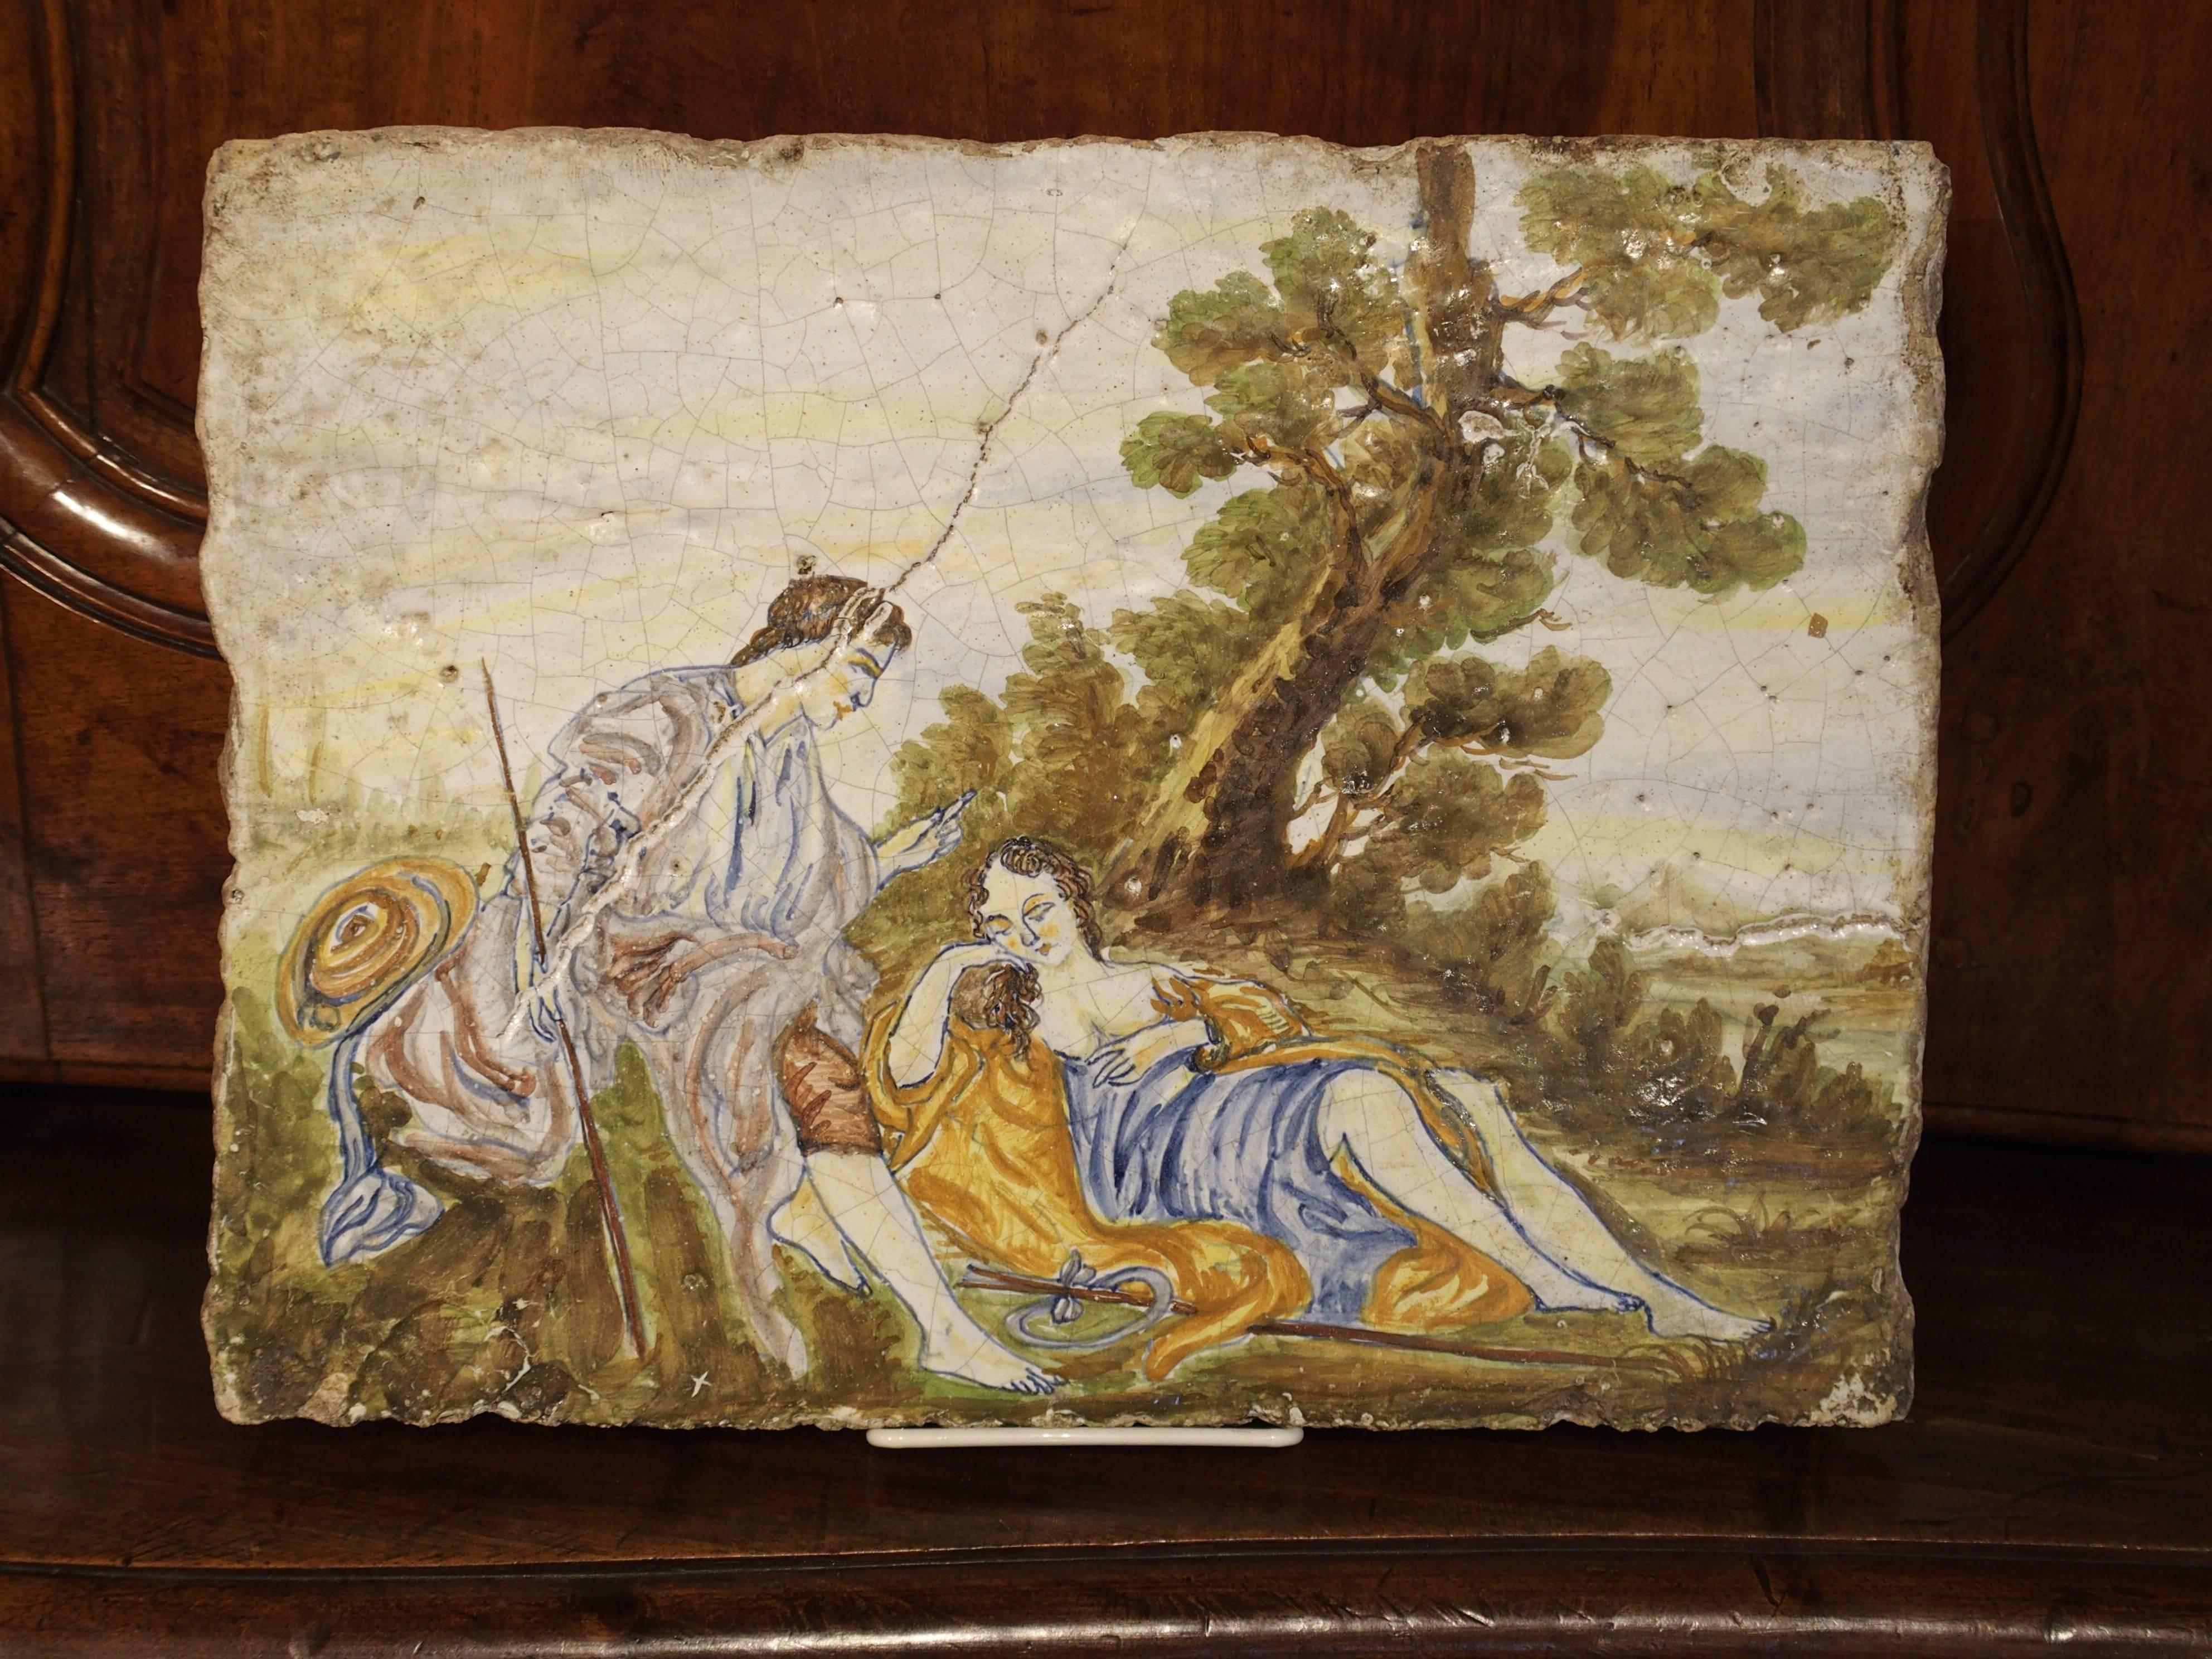 Italian Antique Painted Tile from Italy, 17th Century